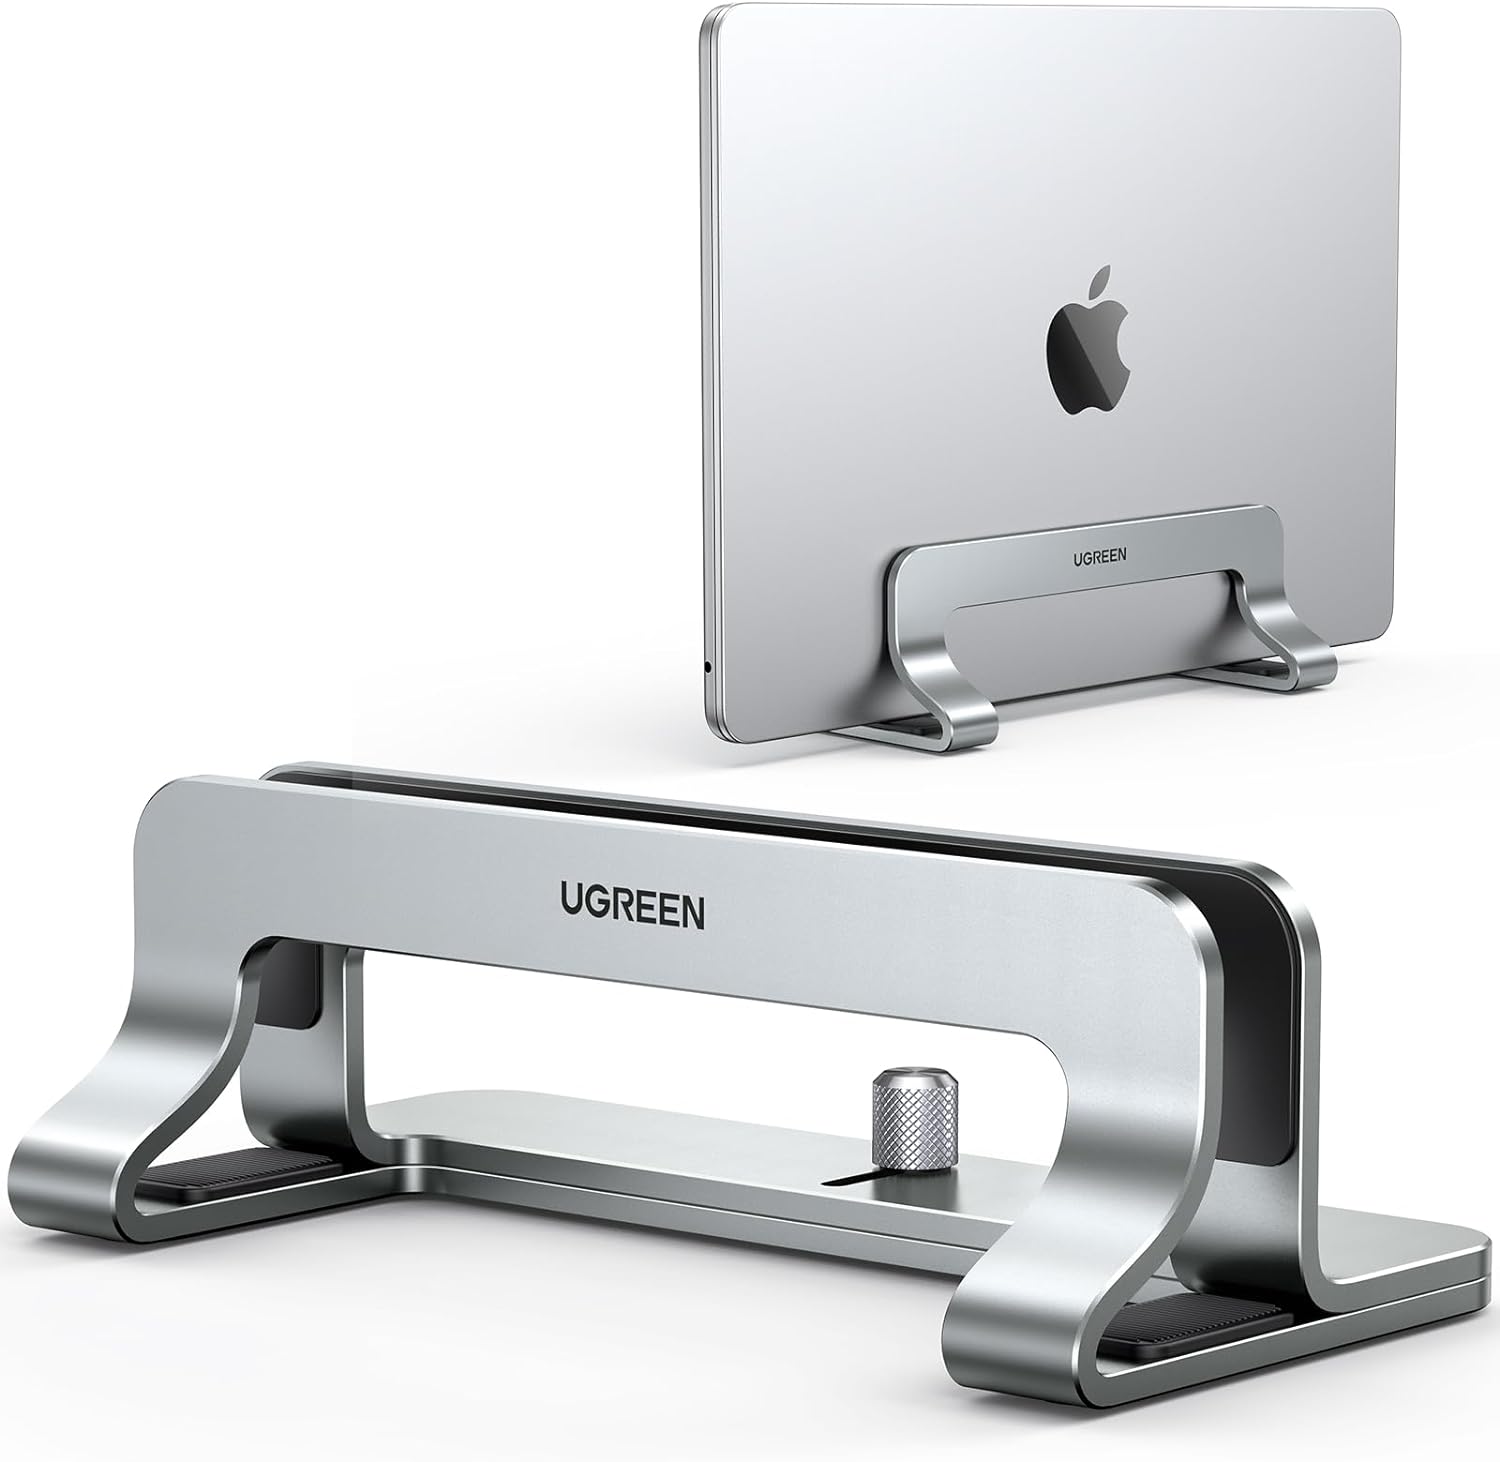 UGREEN Aluminum Vertical Laptop Stand, Double Desktop Stand Holder with Adjustable Dock Space-Saving Anti Slide Silicone Grips for All Tablet/iPad MacBook/Surface/Samsung/HP/Dell/Chrome Book Sliver